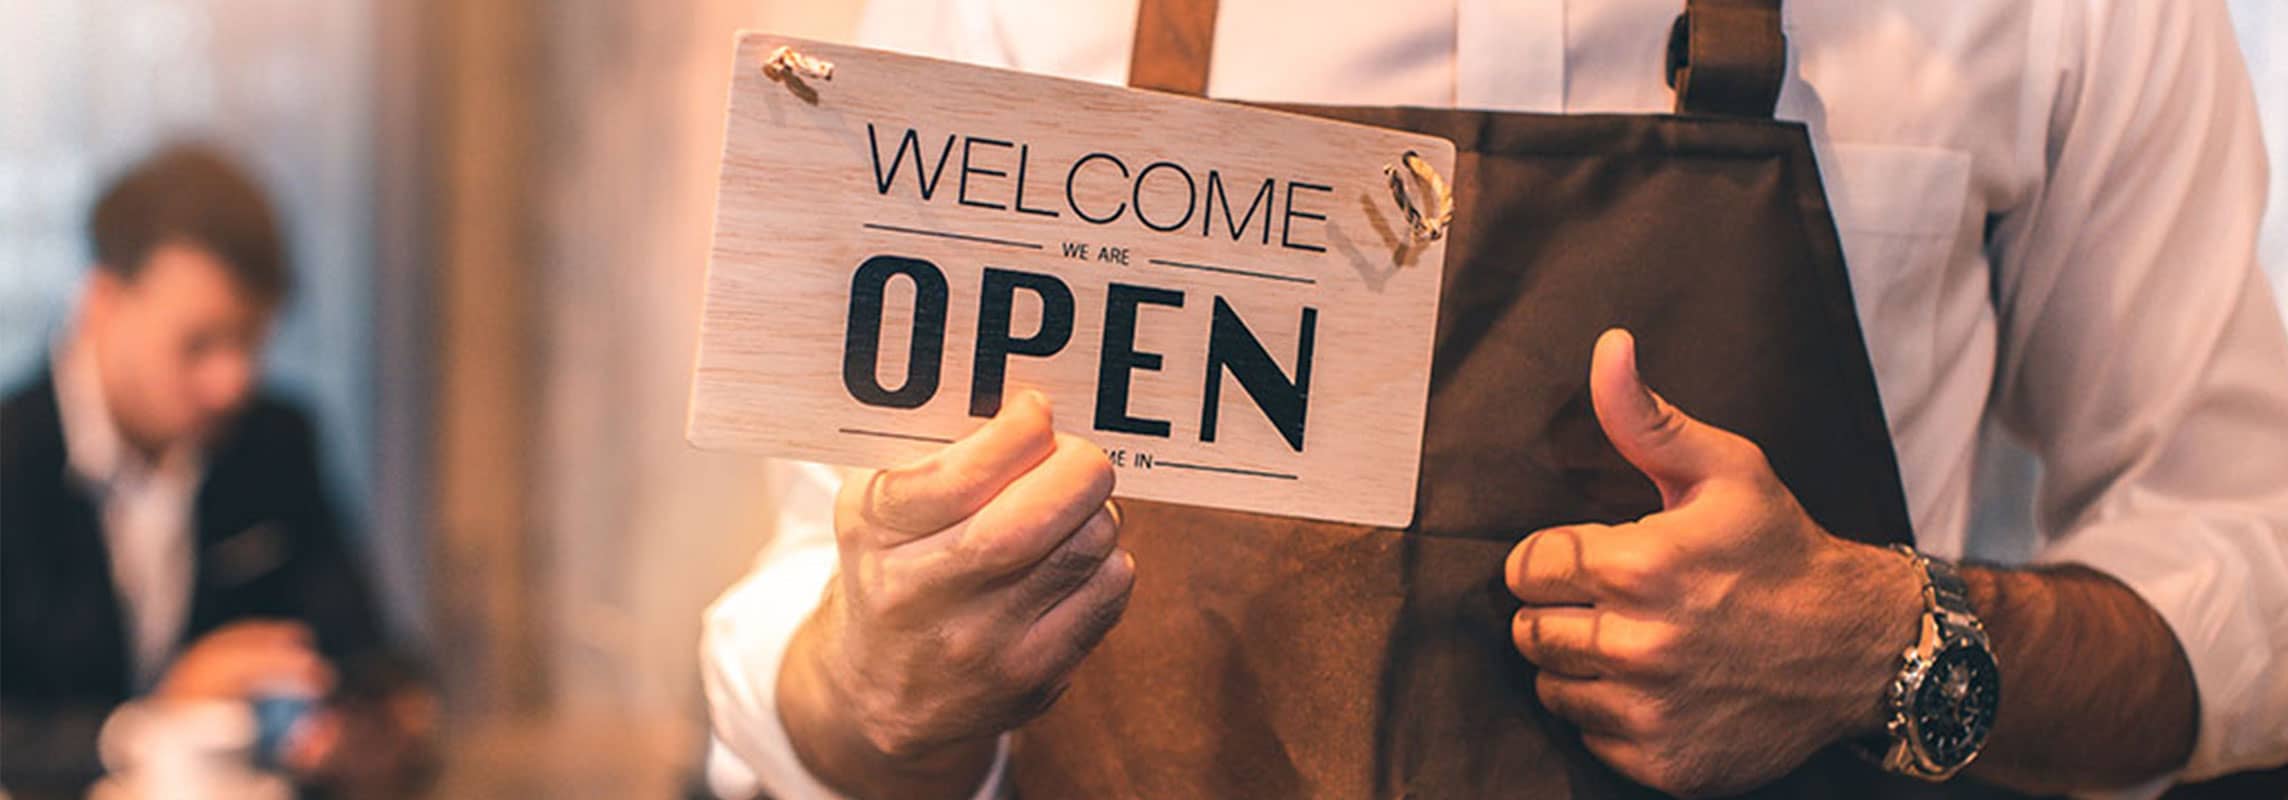 man holding welcome we are open sign